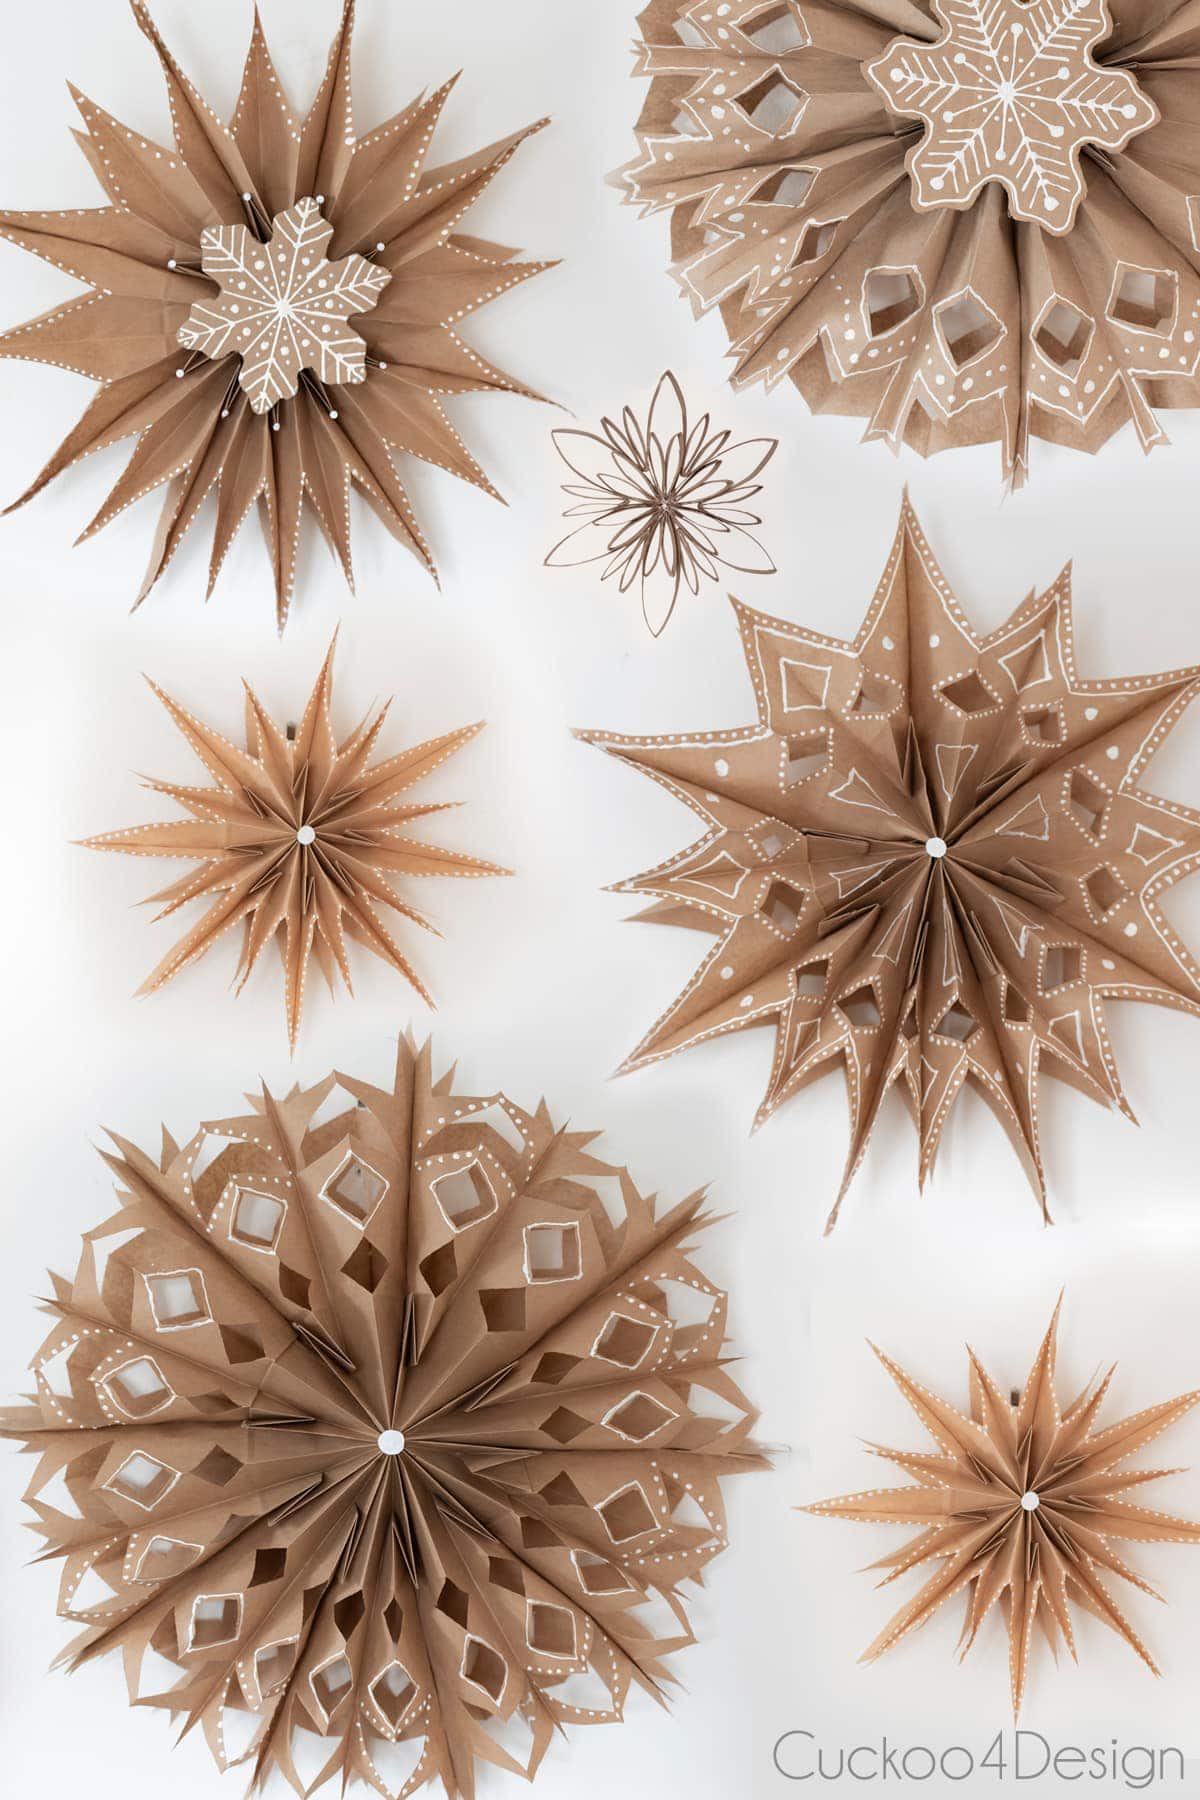 one small toilet paper roll snowflake amongst different paper bag snowflakes